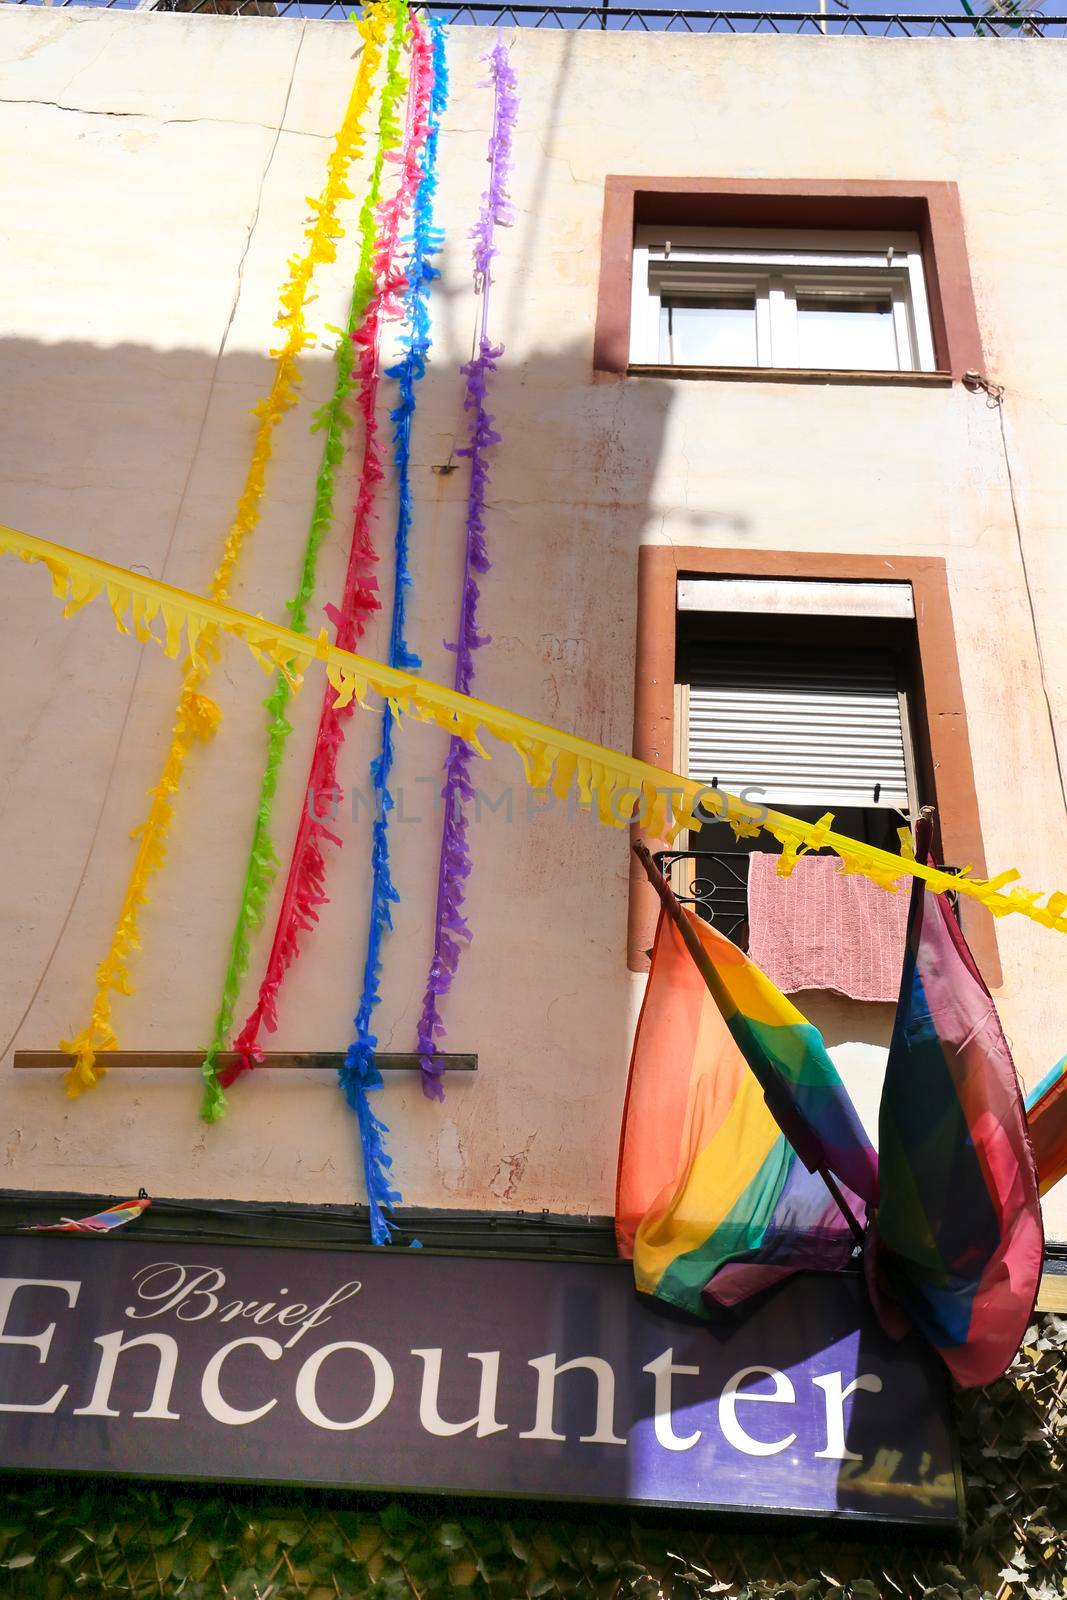 Benidorm, Alicante, Spain- September 10, 2022: Streets and facades adorned with colorful rainbow flags for The Gay Pride in Benidorm